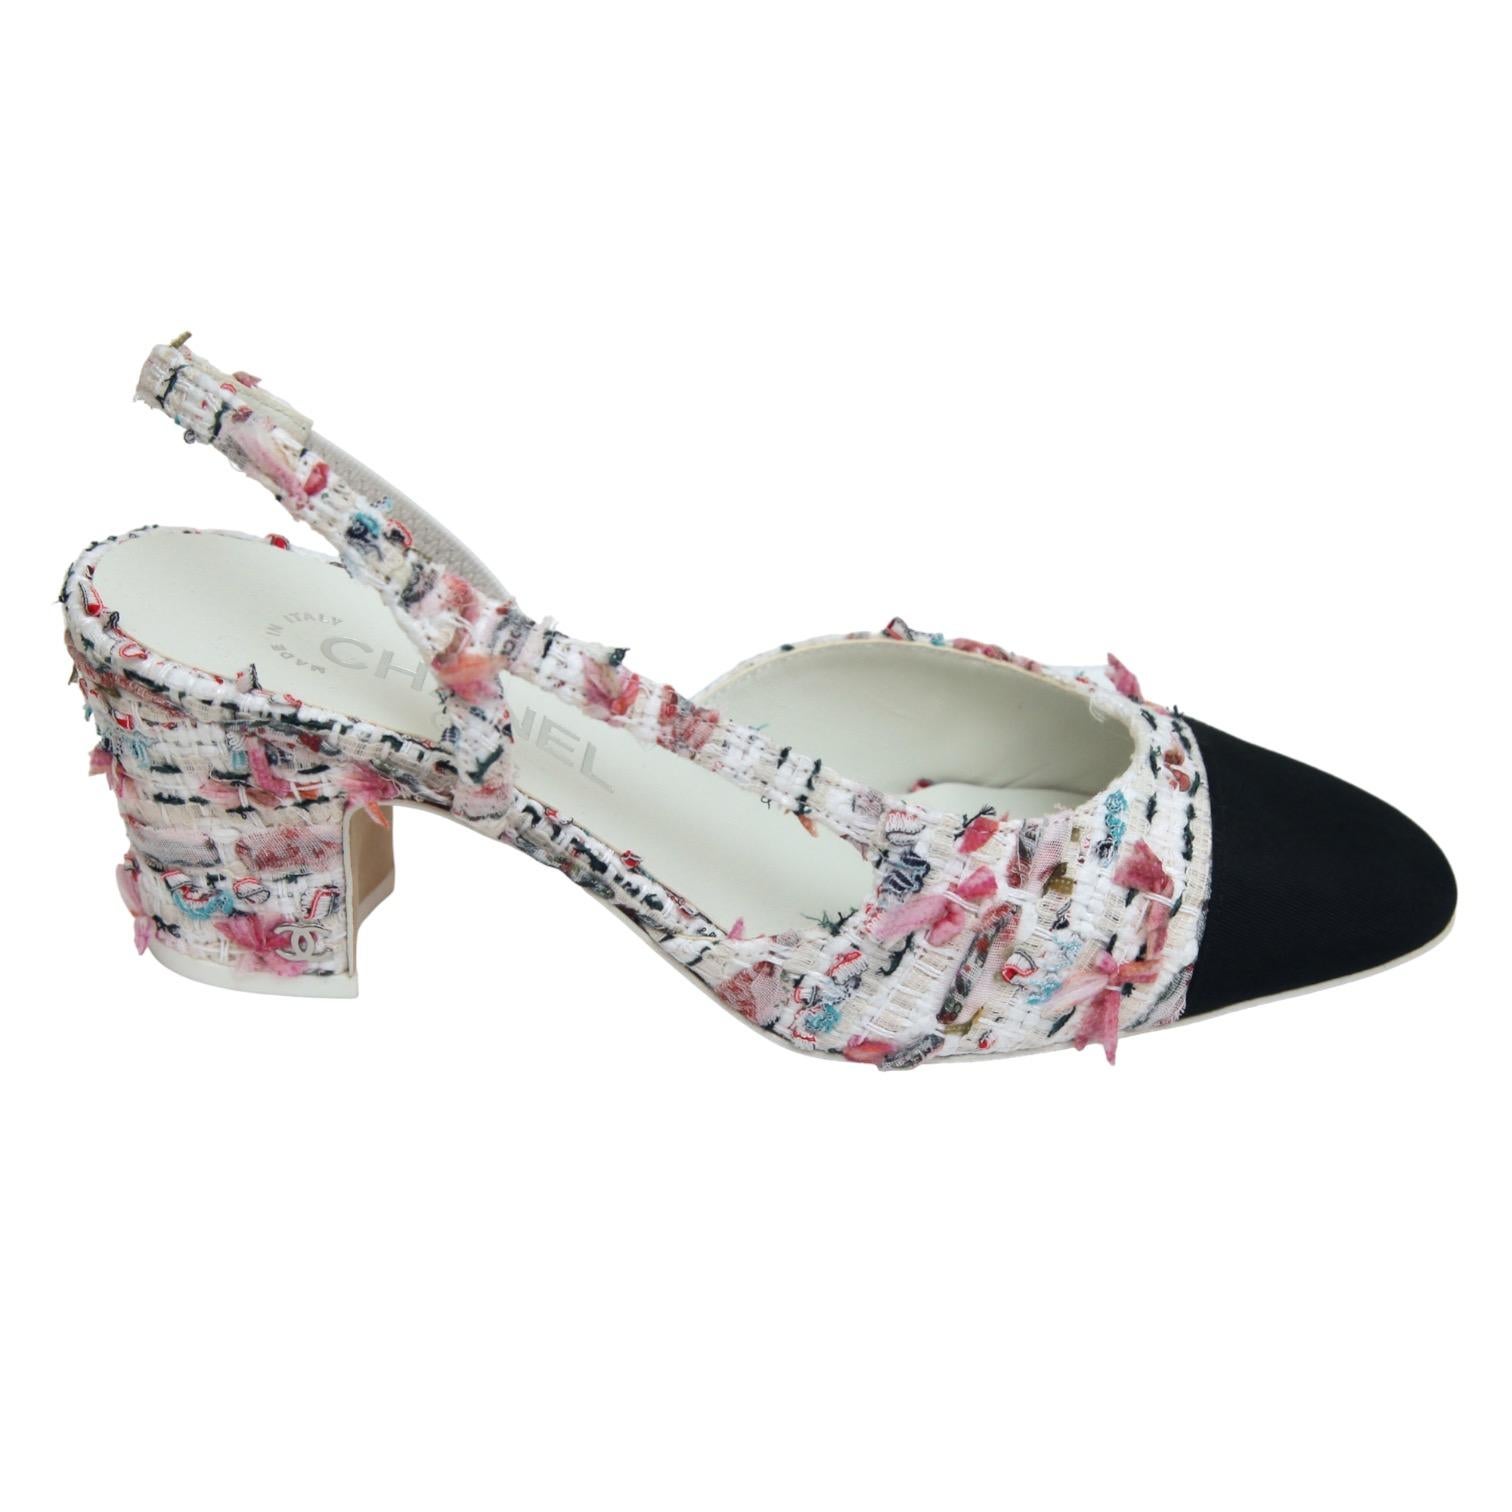 GUARANTEED AUTHENTIC CHANEL 2023 FANTASY TWEED SLINGBACK PUMPS

Details:
- White fantasy tweed slingback pumps with pink and red accents.
- Black grosgrain almond cap toe.
- Elasticized slingback.
- Leather insole and sole.
- Comes with designer